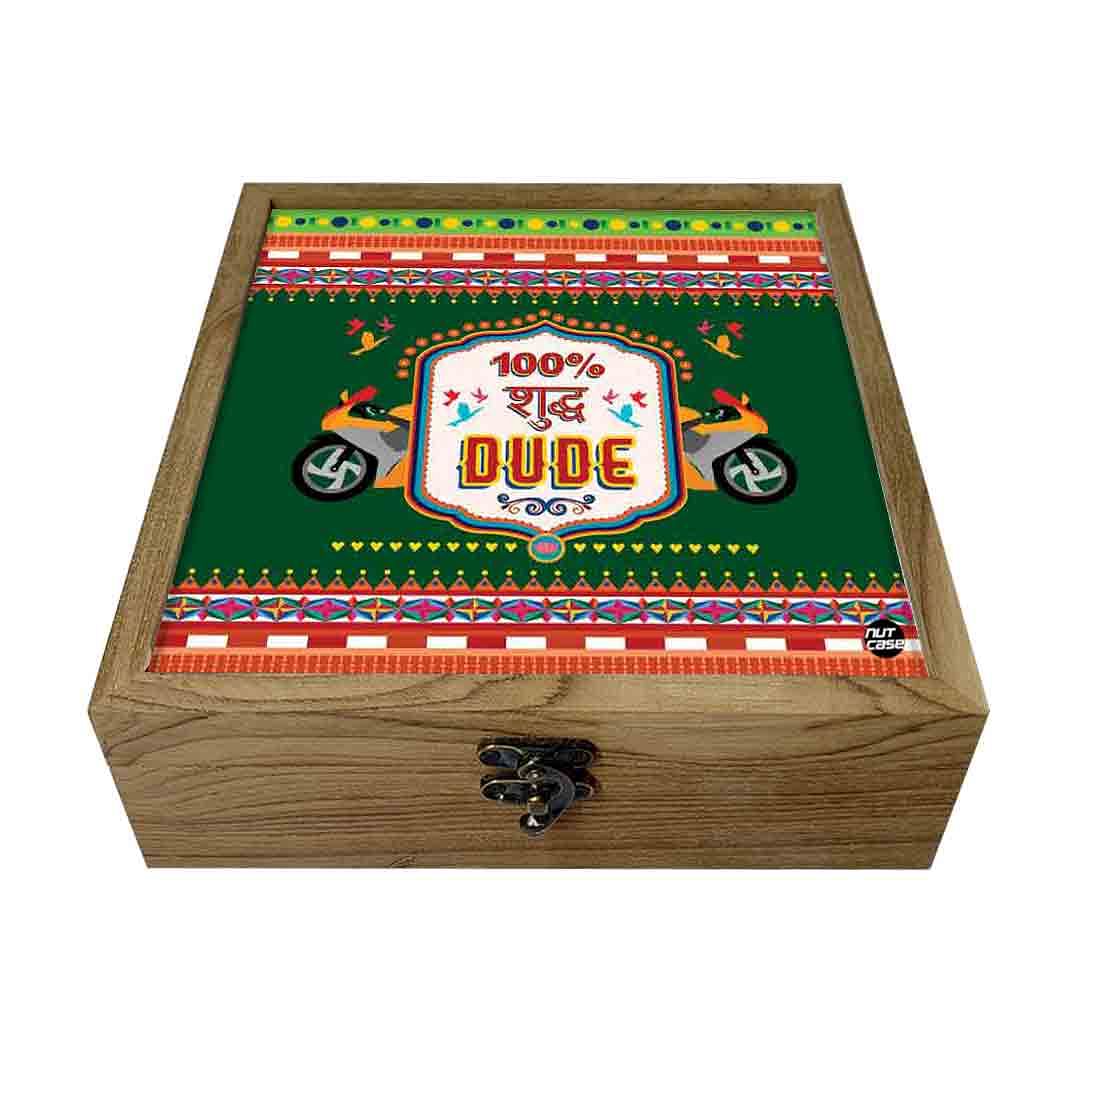 Hip Flask Gift Box -Indian Kitsch Quirky Design - Suddh Dude Nutcase